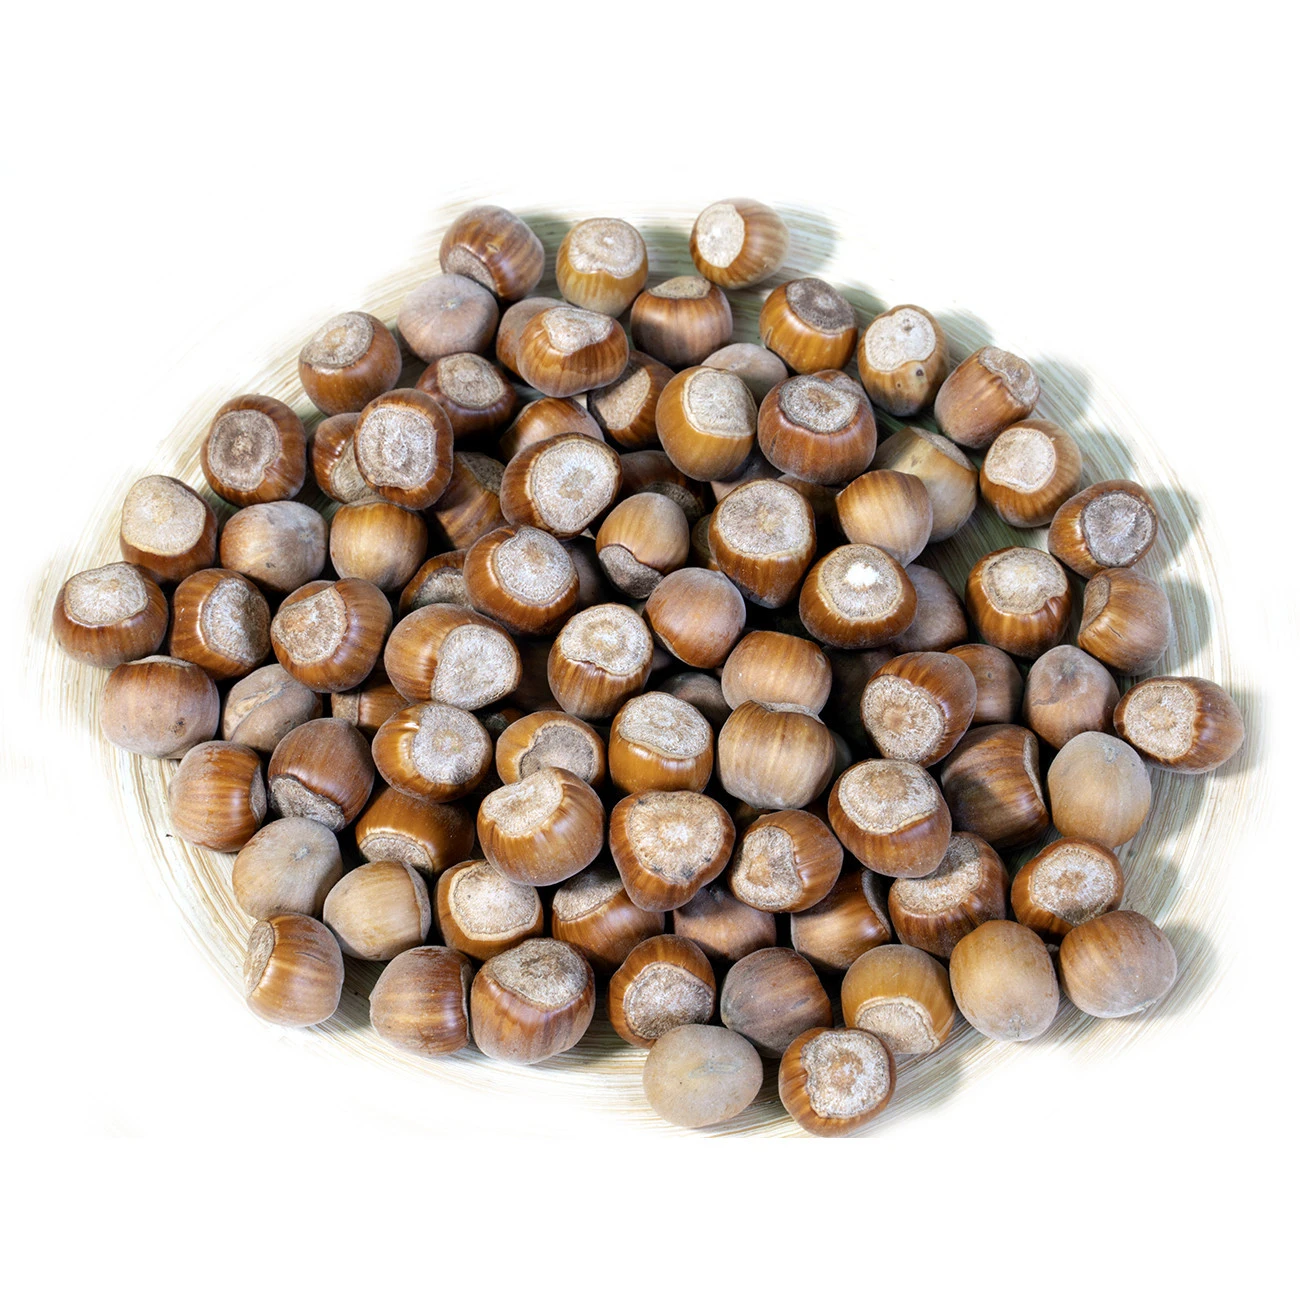 Top Quality | OEM ITALIAN | Organic Hazelnuts in Shell  | for export